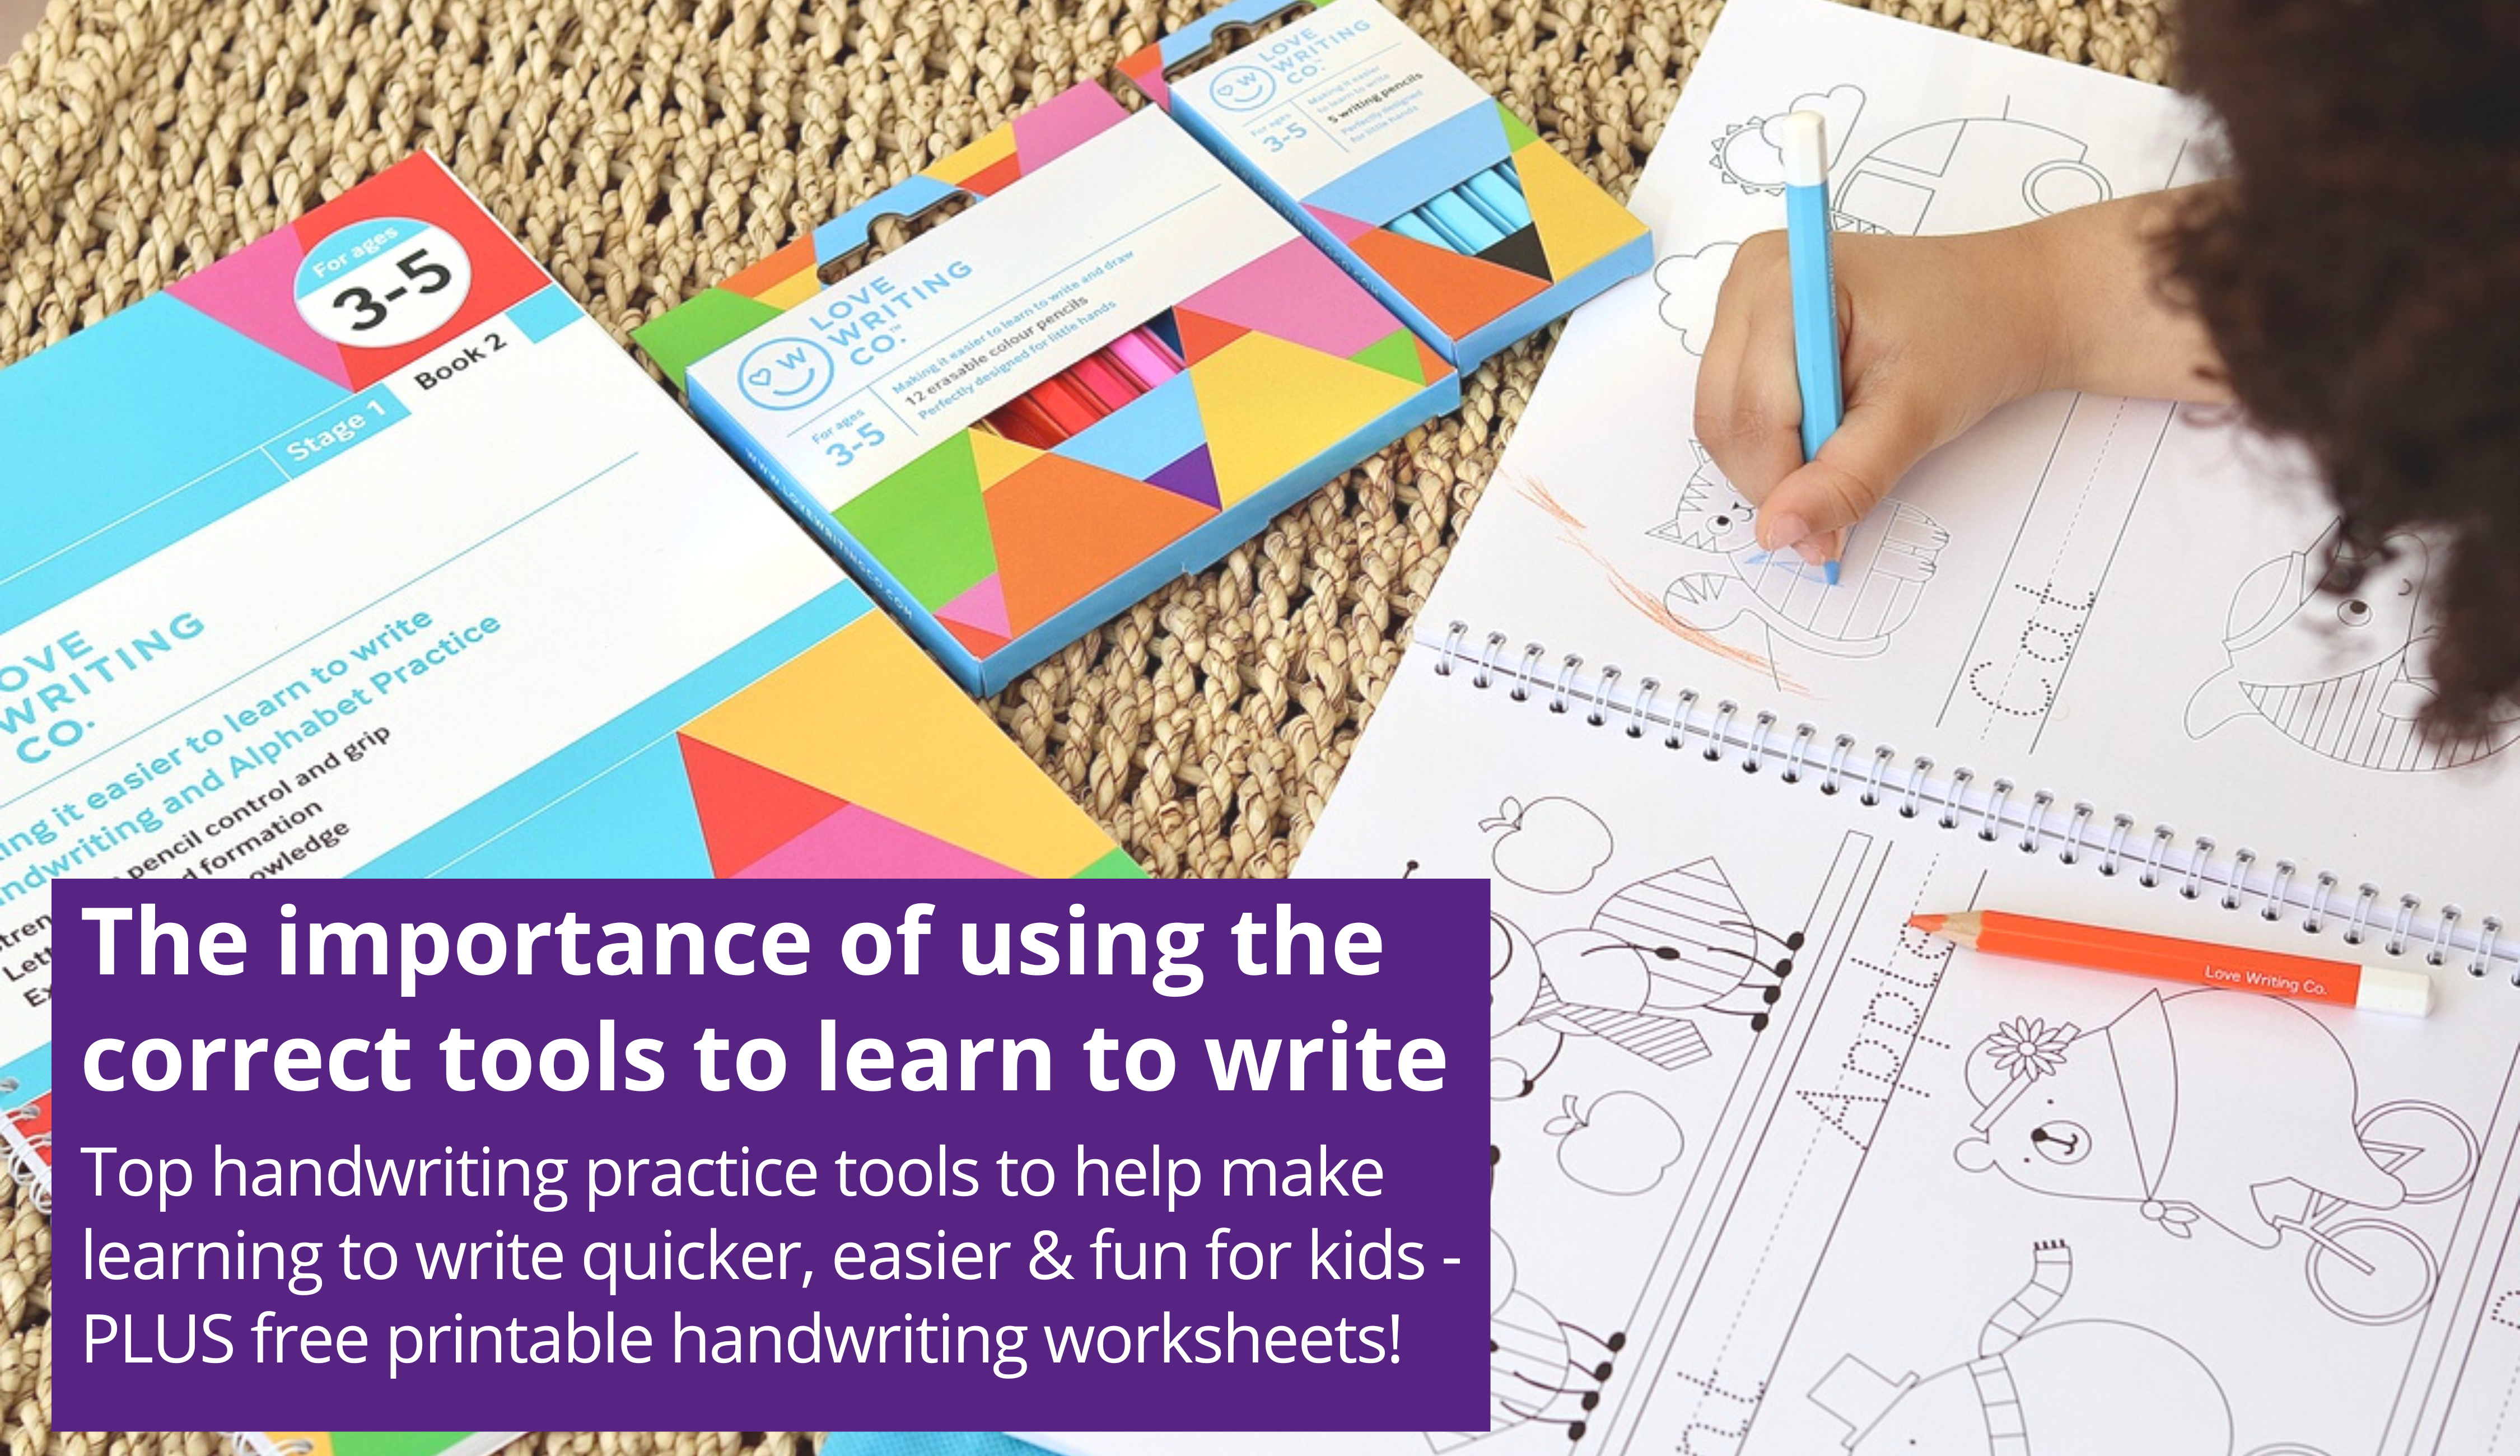 The Importance Of Using the Correct Tools When Learning to Write